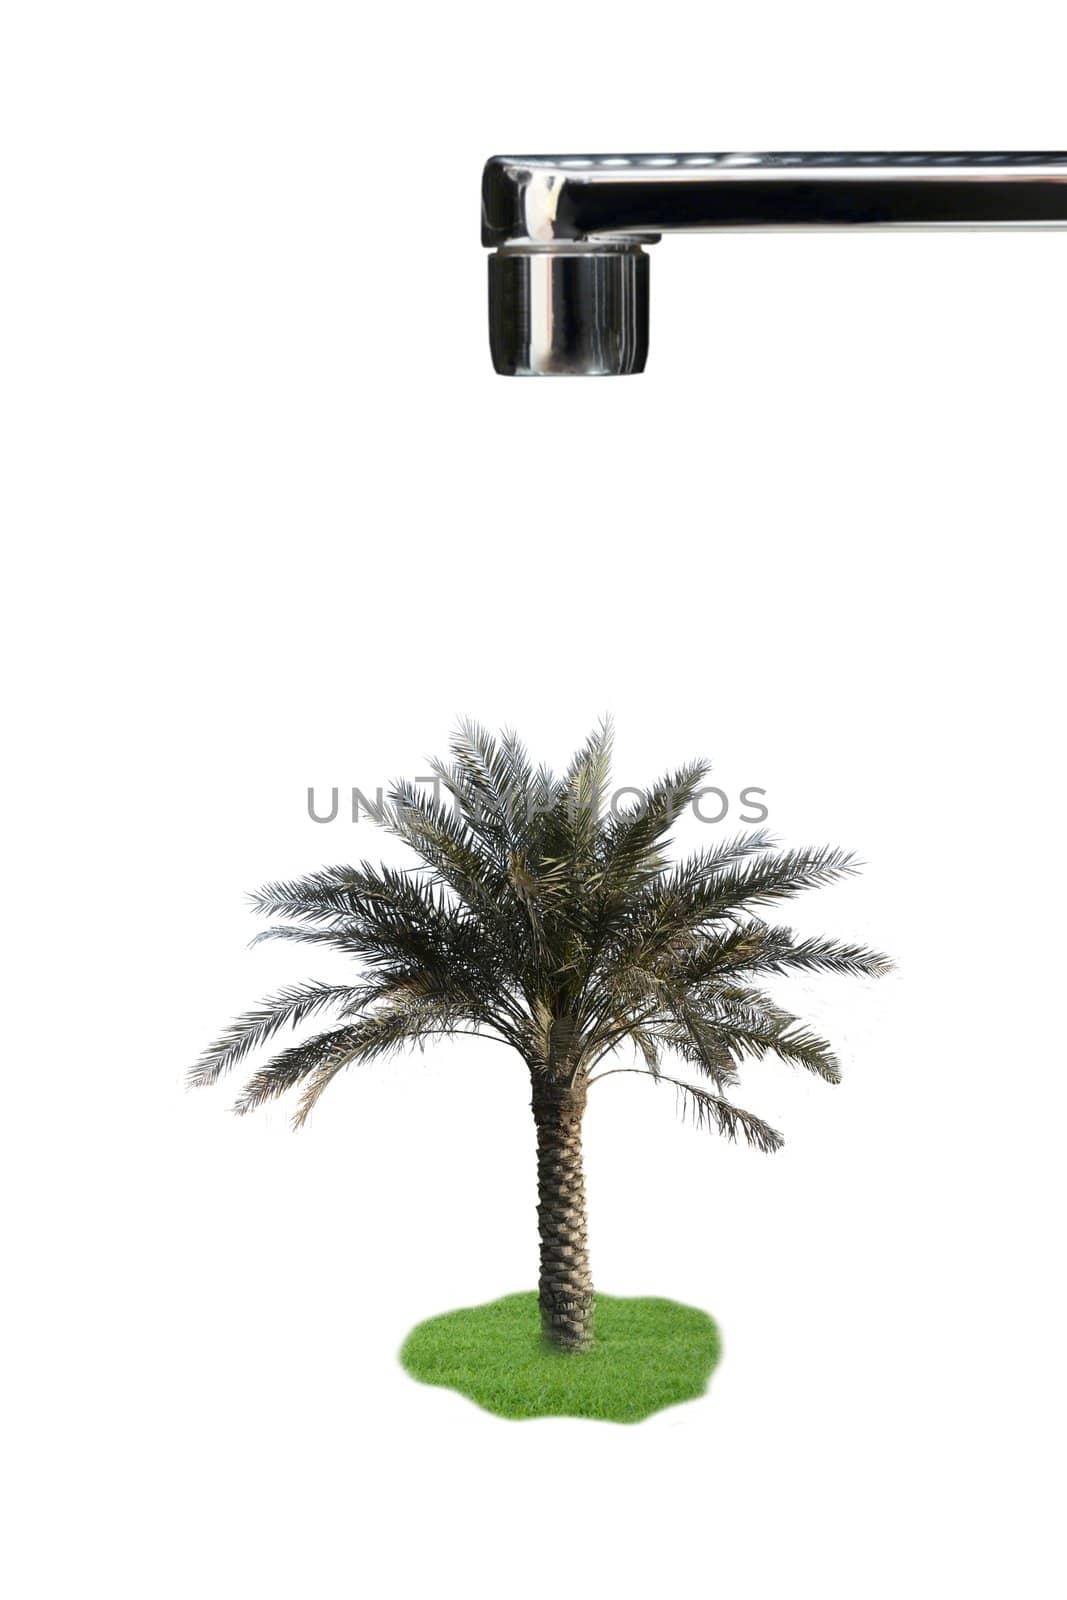 Concept faucet with palm tree by EugenP